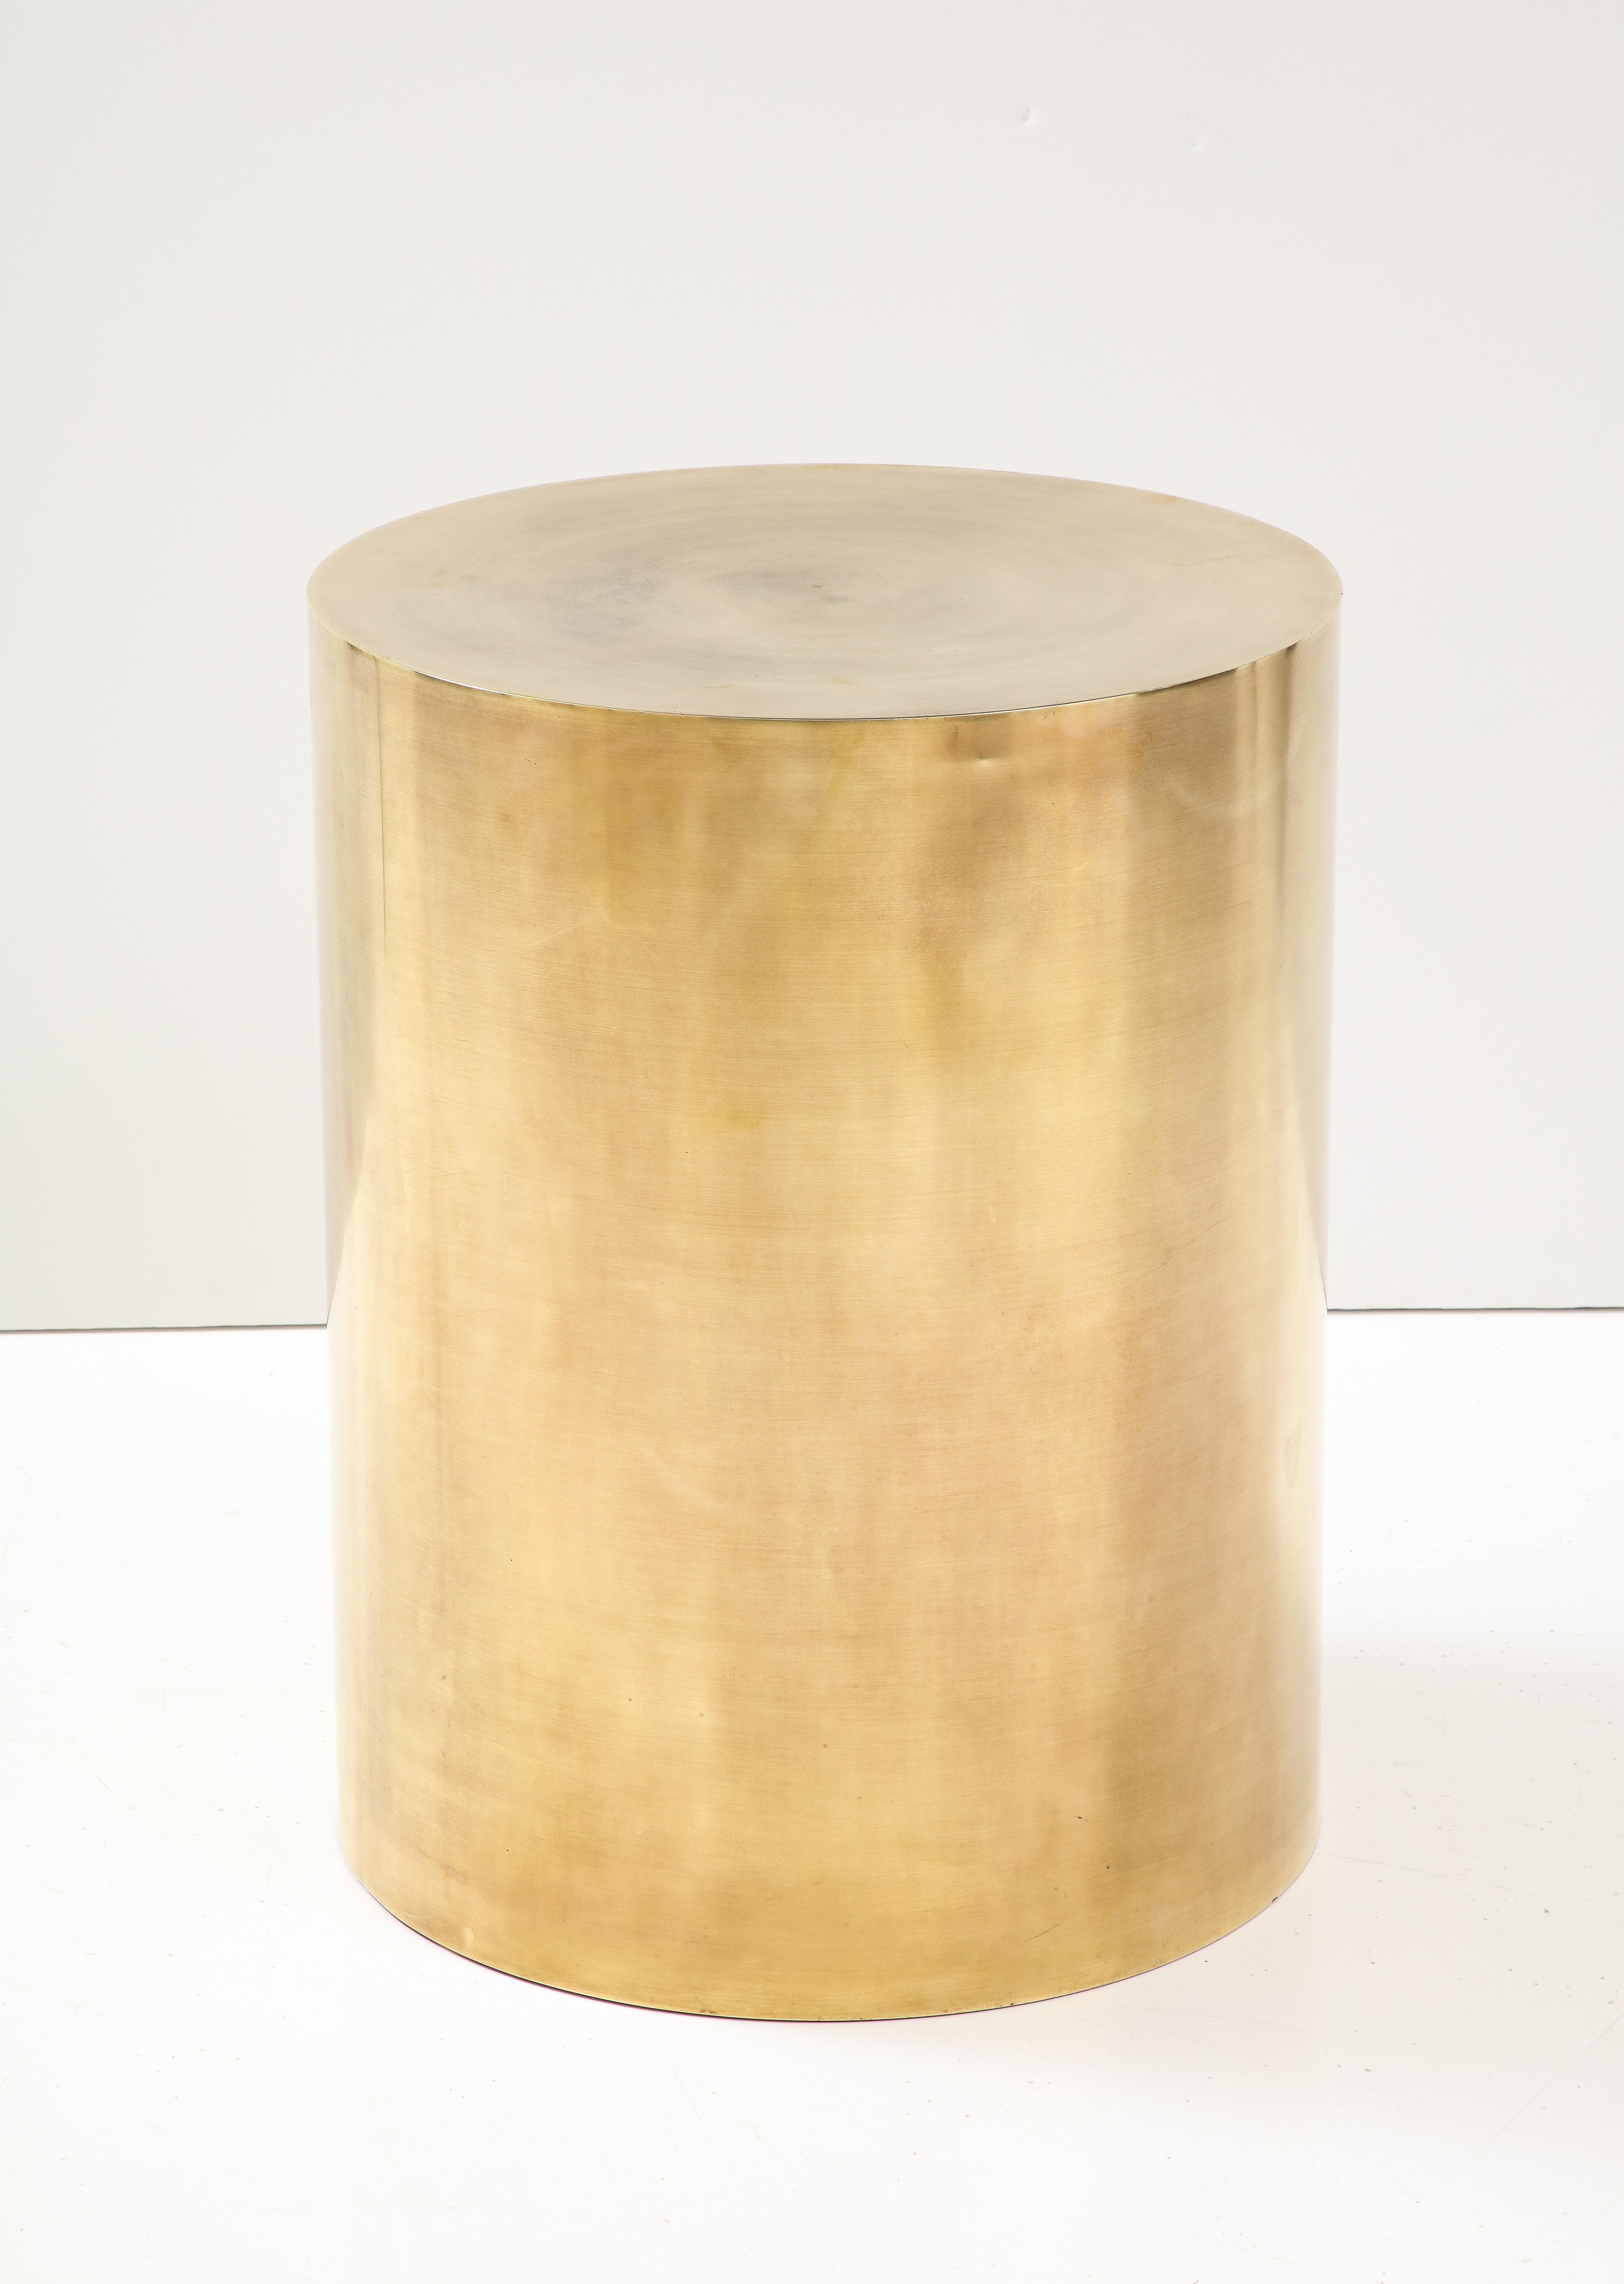 1970's Mid-Century Modern Brass Drum Dining Table Attributed To Brueton For Sale 8